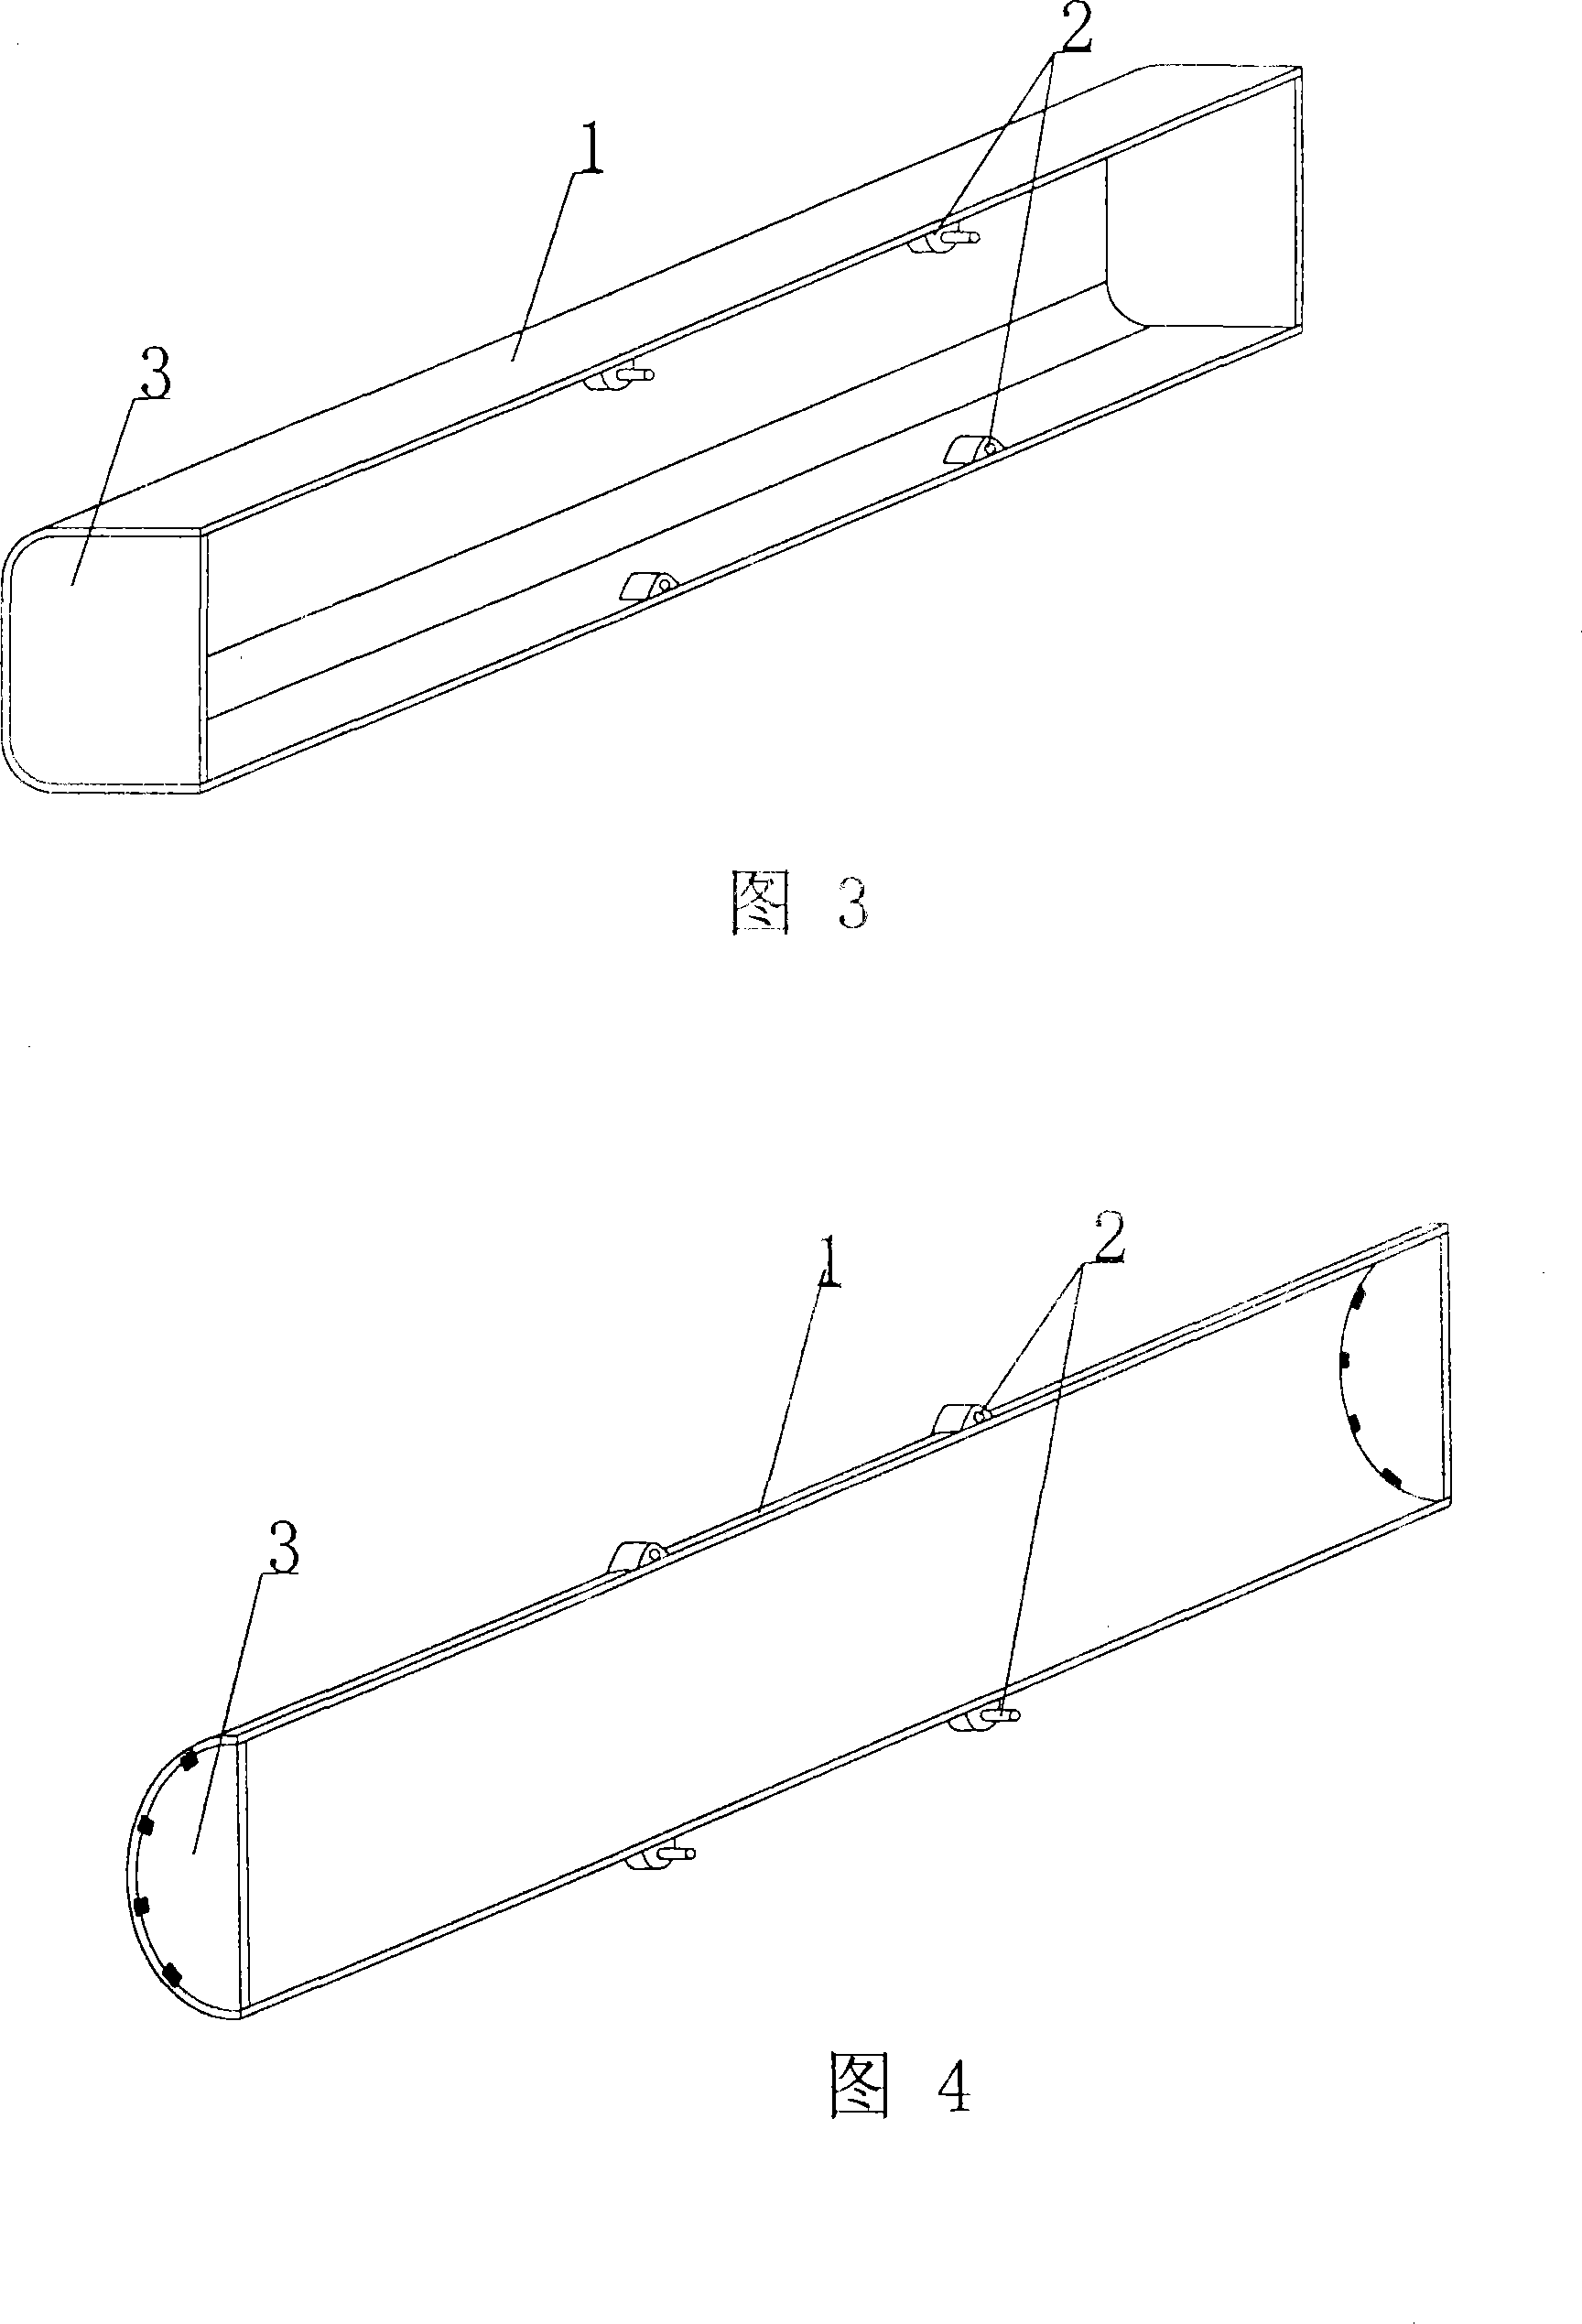 Component for cast-in-situs reinforcing steel concrete pore-creating